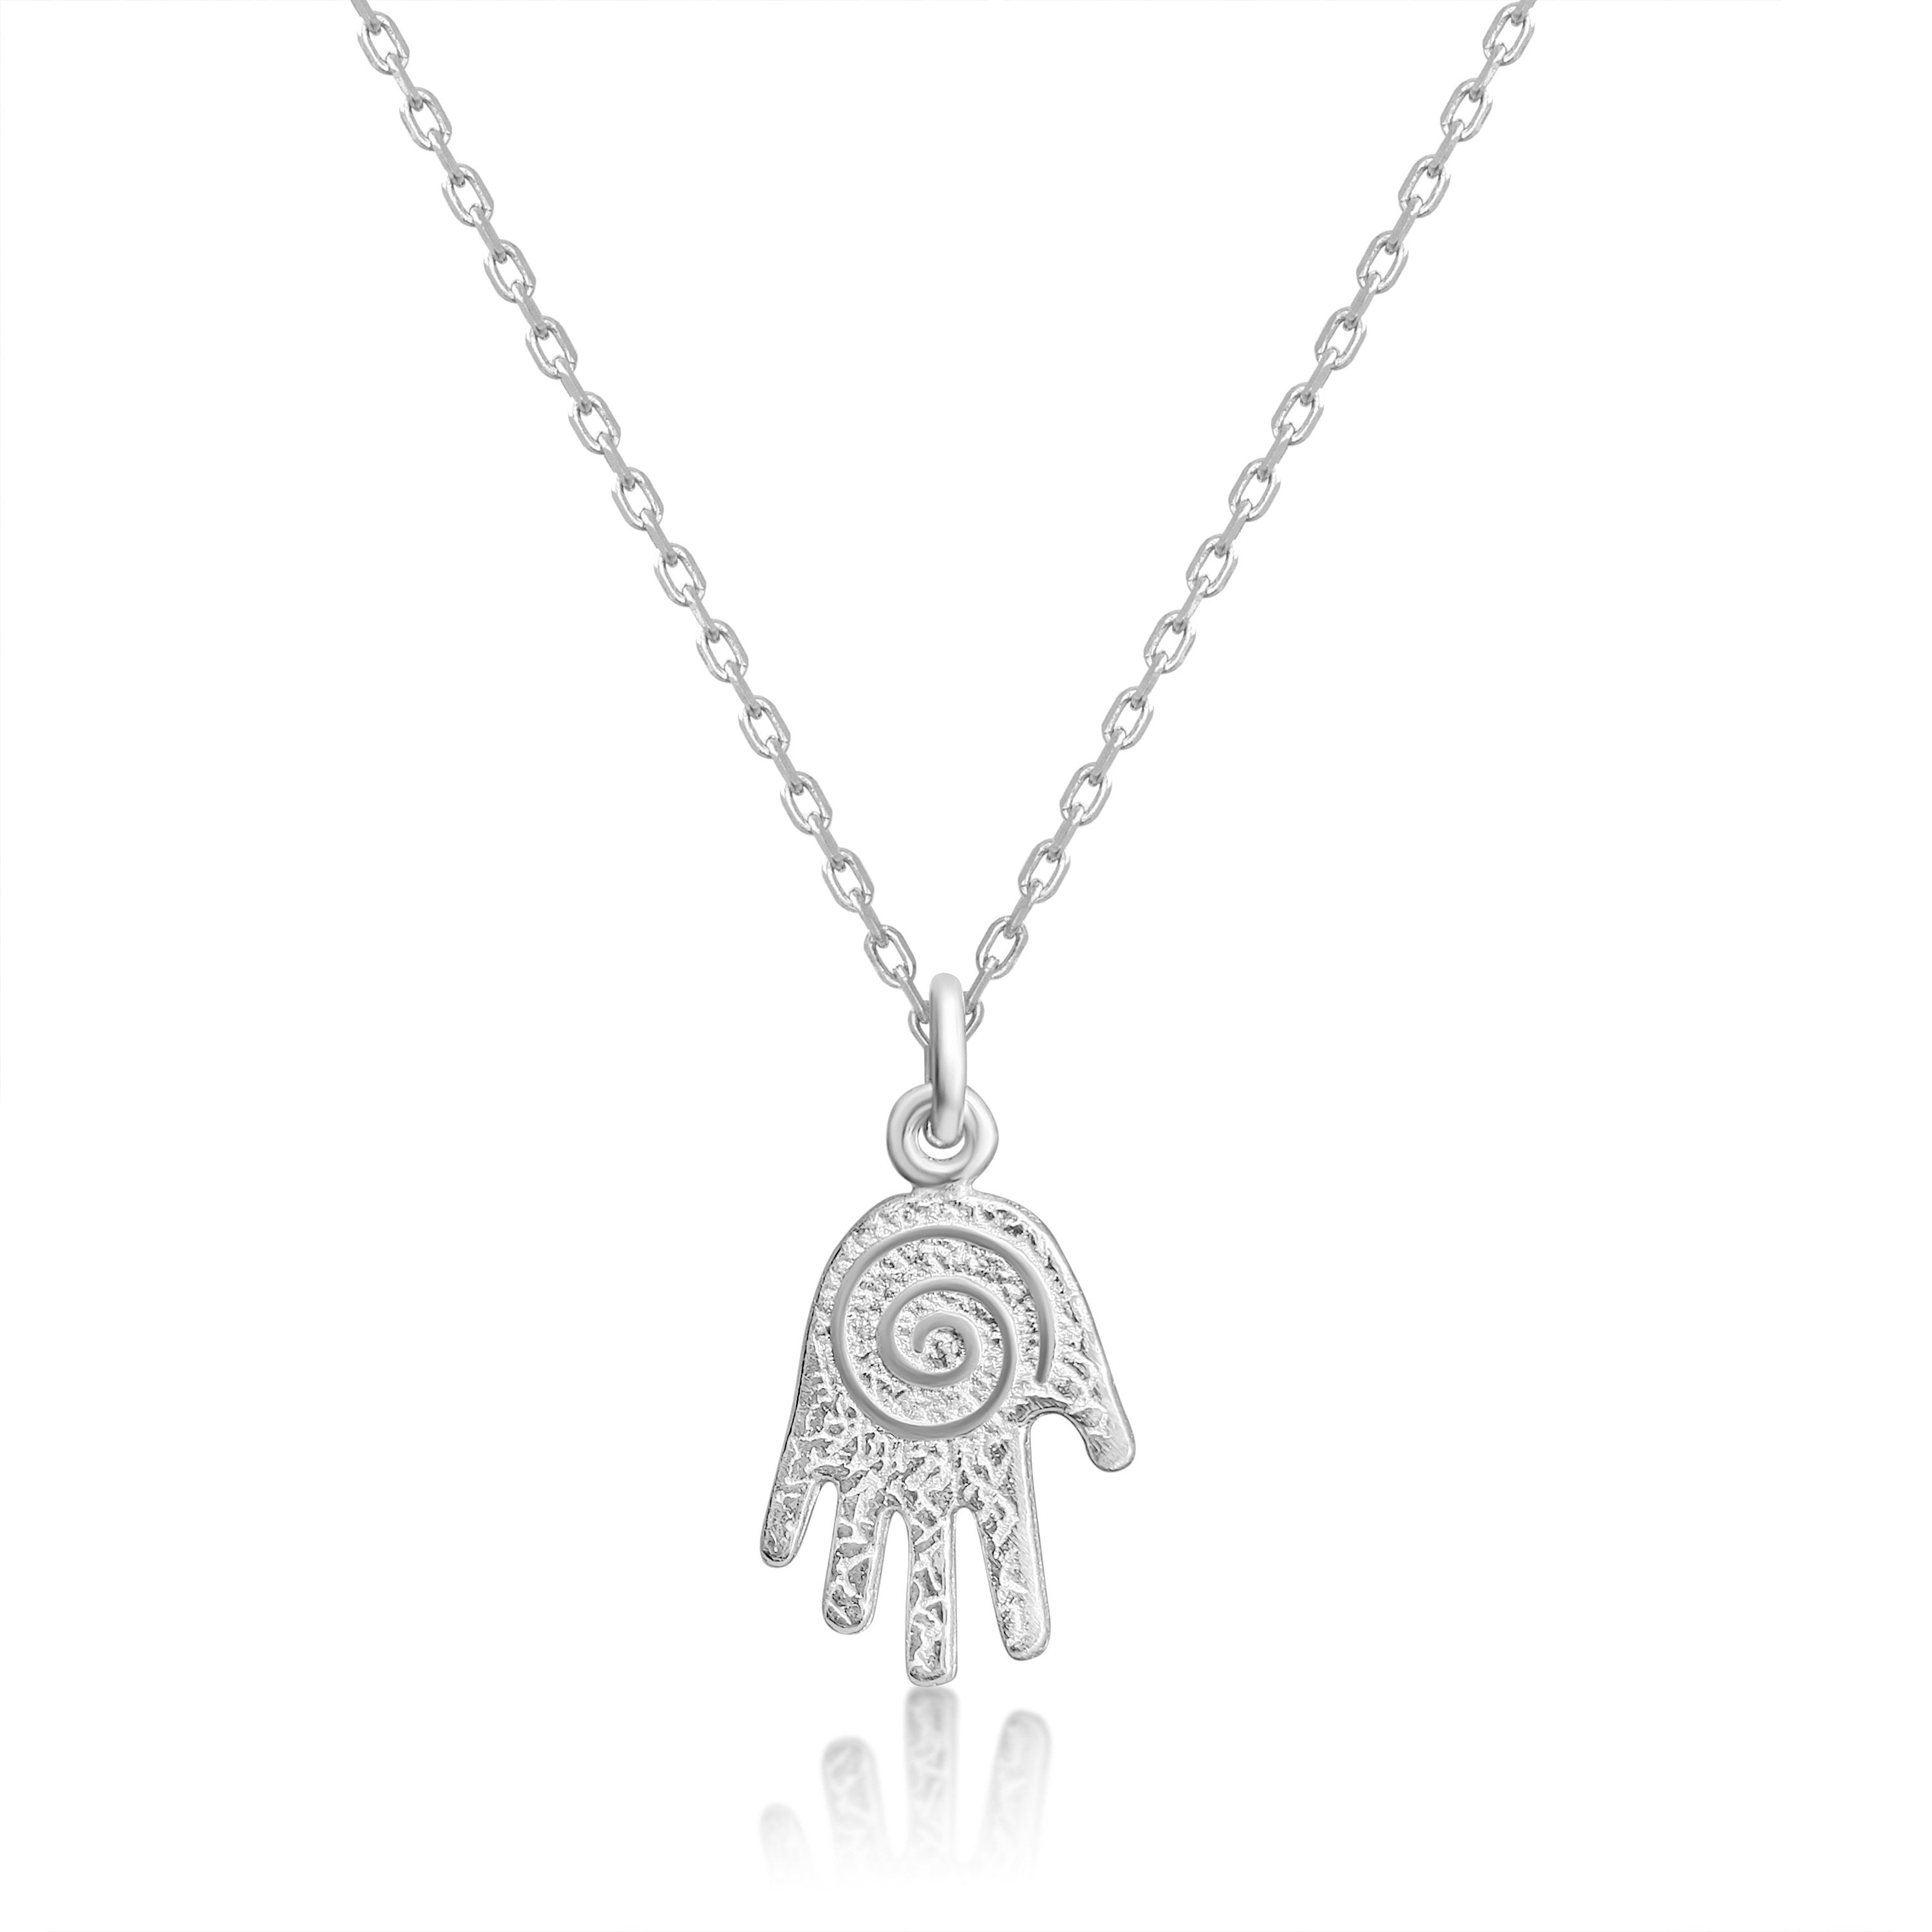 hamsa necklace with infinity sign